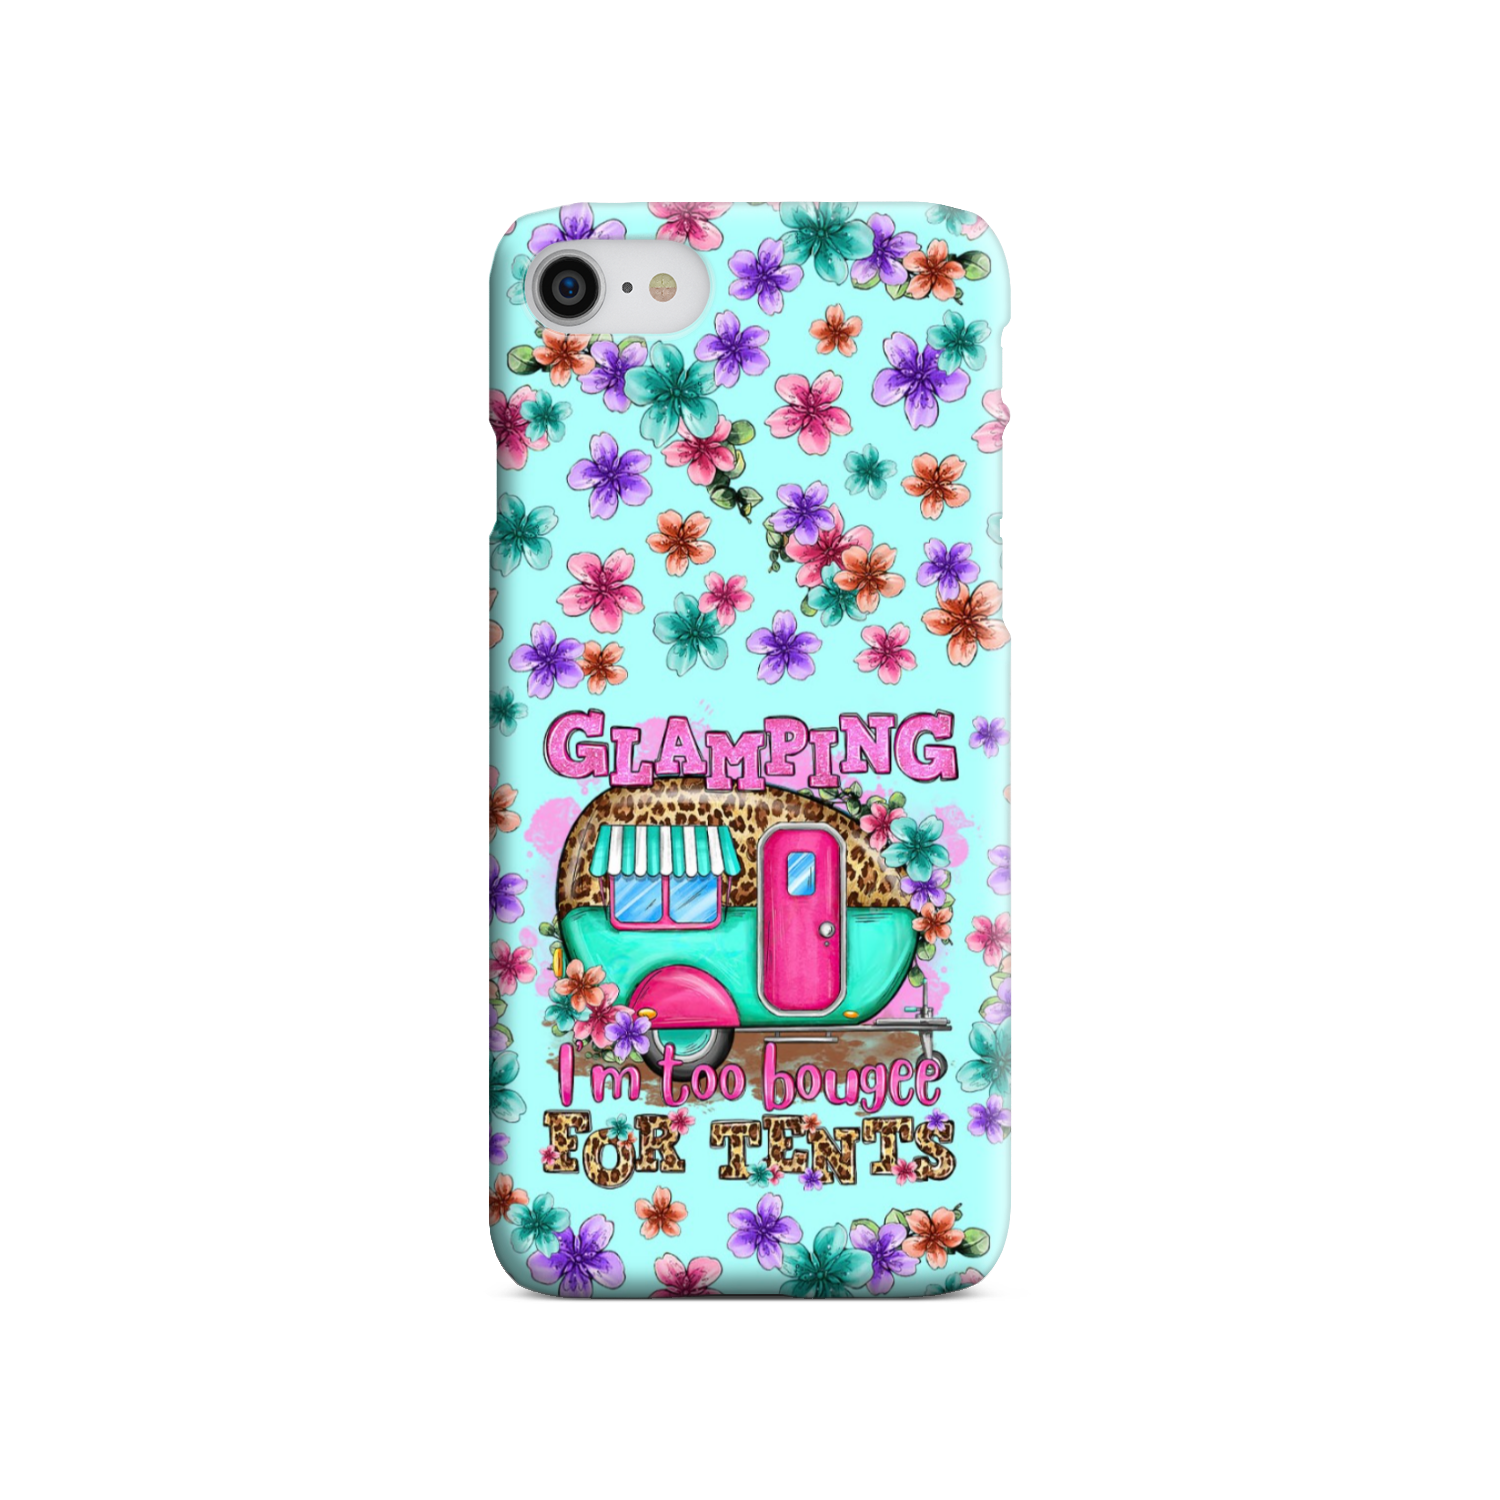 GLAMPING I'M TO BOUGEE PHONE CASE - TLTR1906236